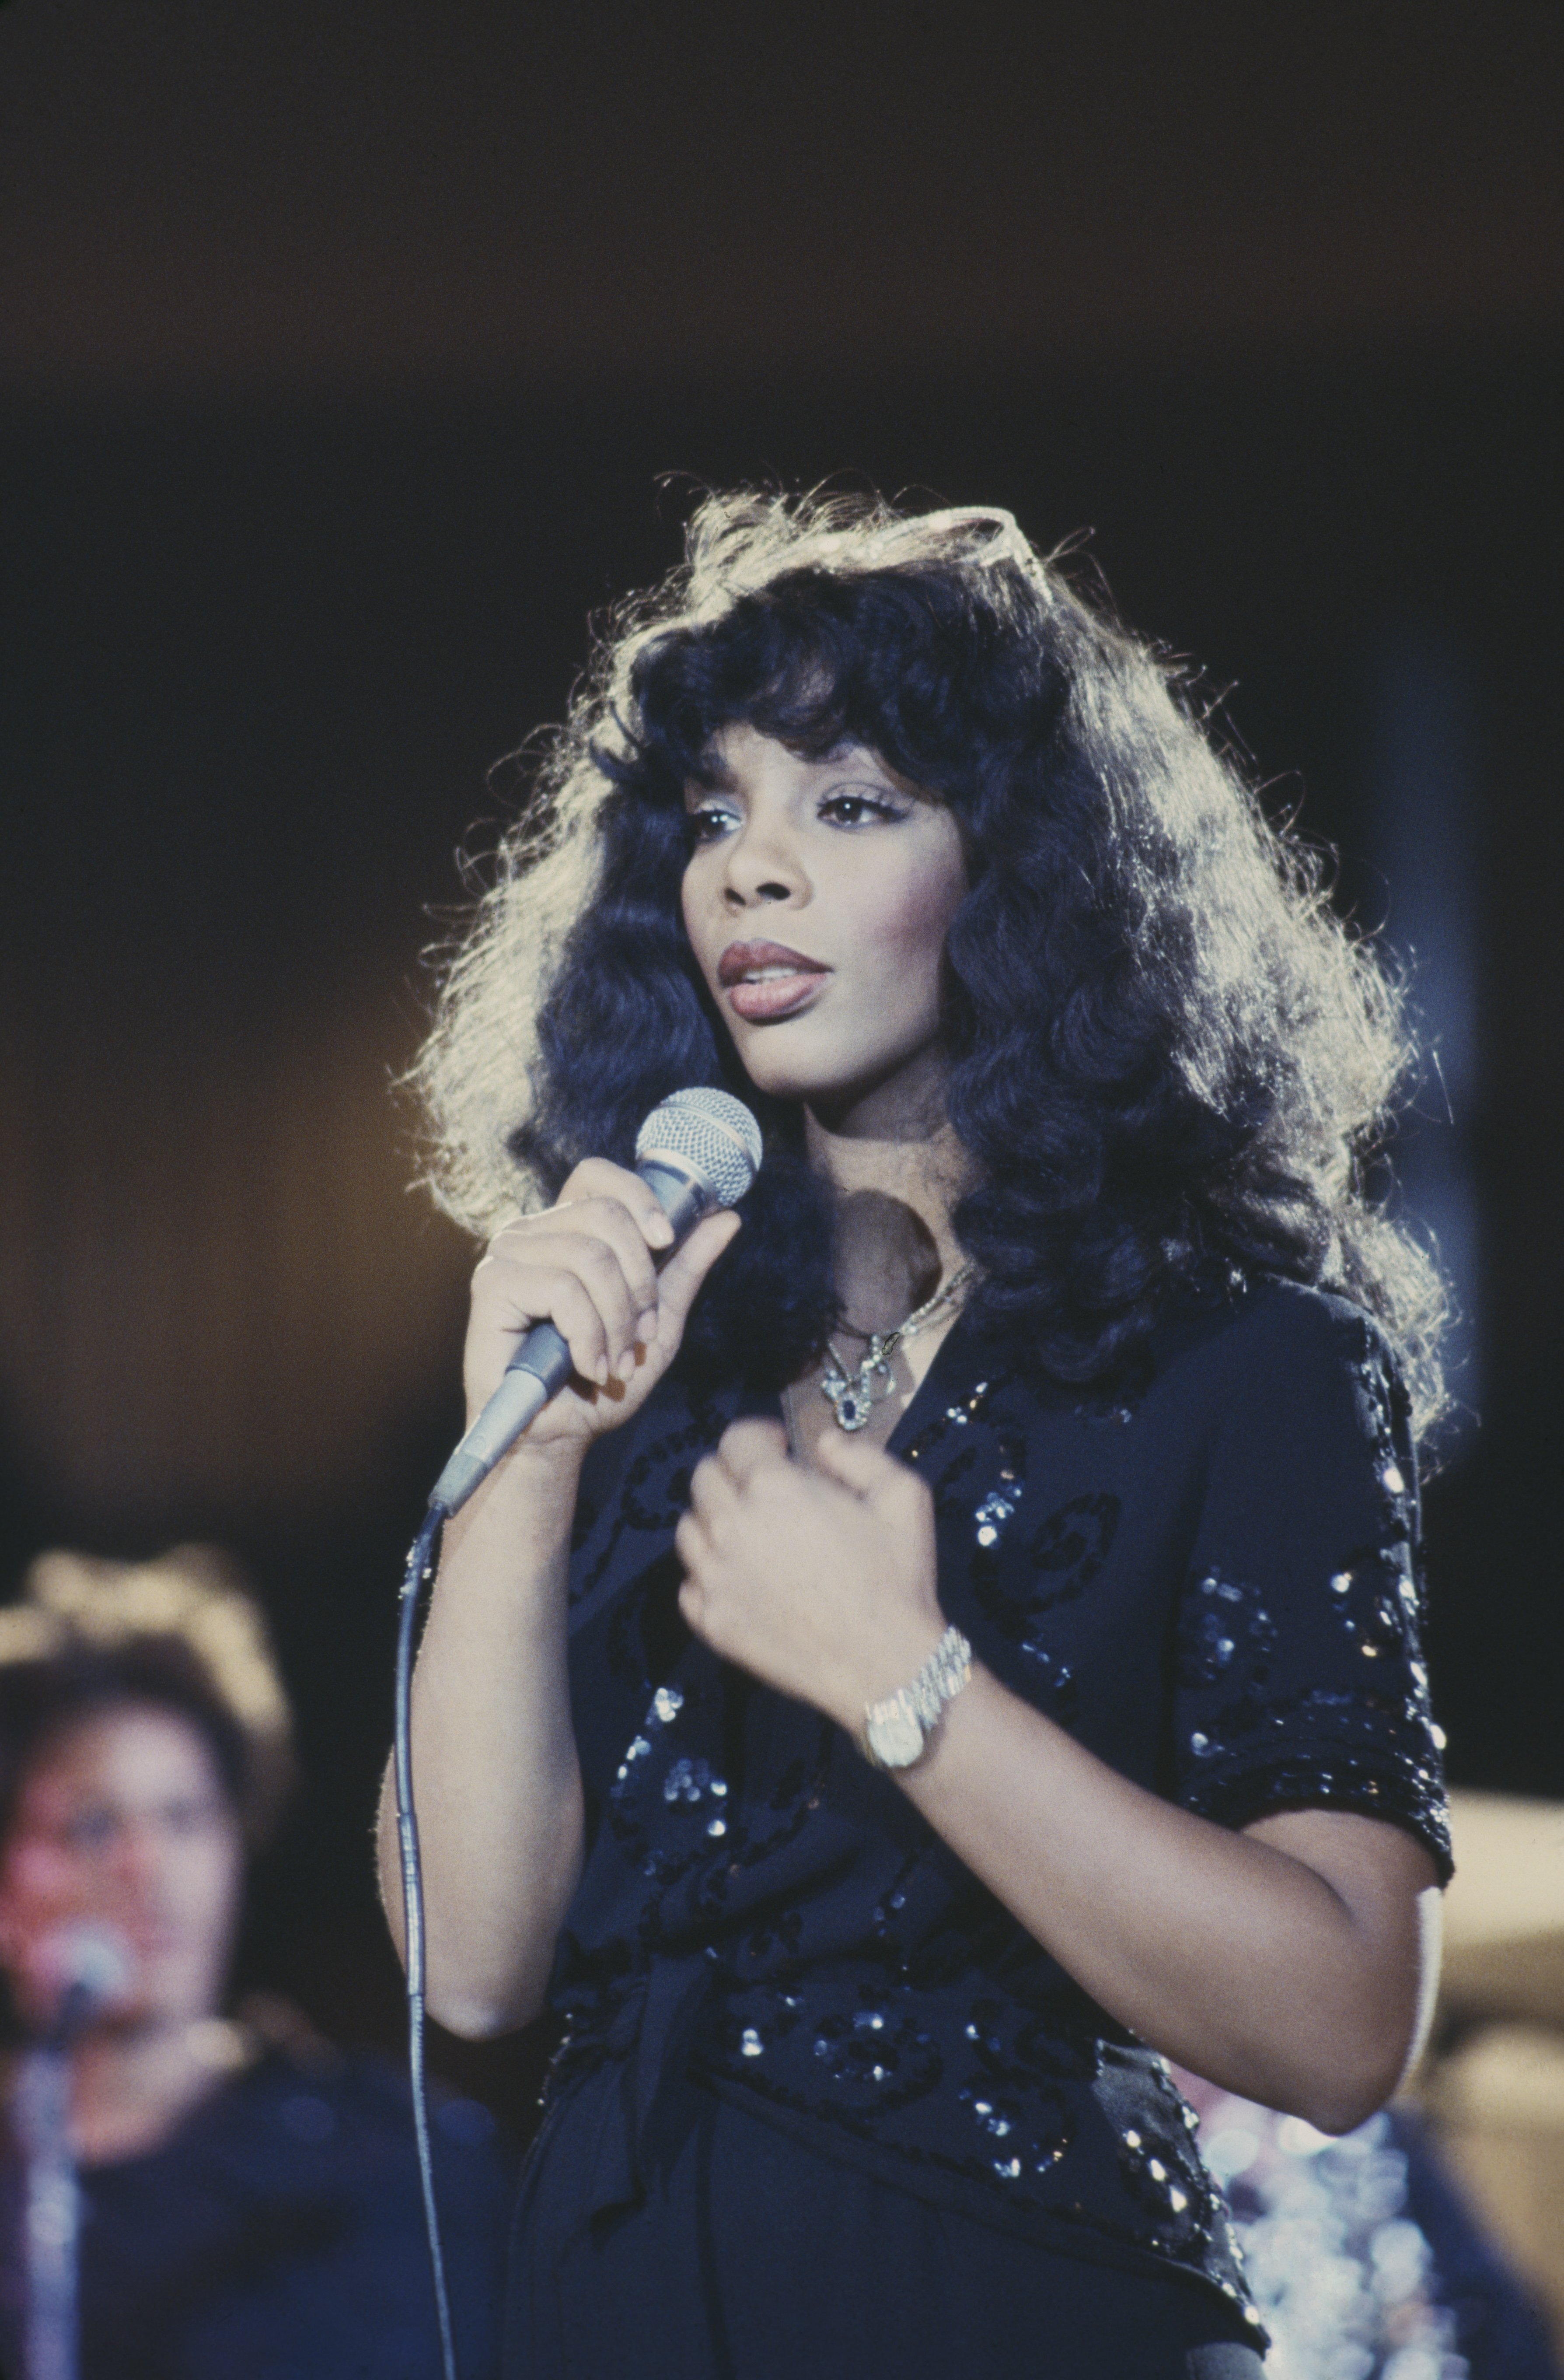 Donna Summer (1948-2012) performs at 'The Music for UNICEF Concert: A Gift of Song' benefit concert held at the United Nations General Assembly in New York City, 9th January 1979 | Source: Getty Images